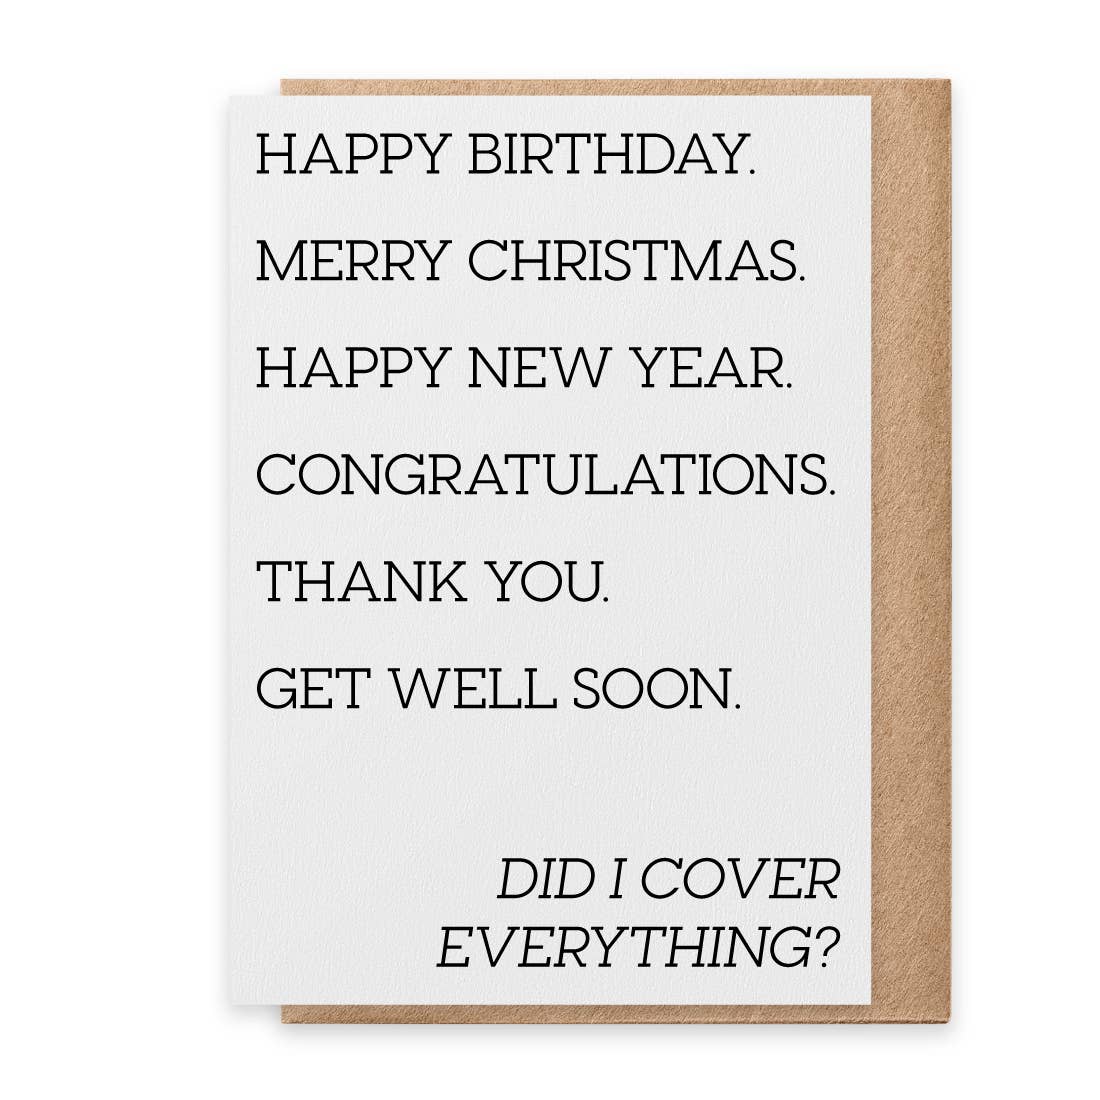 PSPR - Greeting Card - Cover Everything